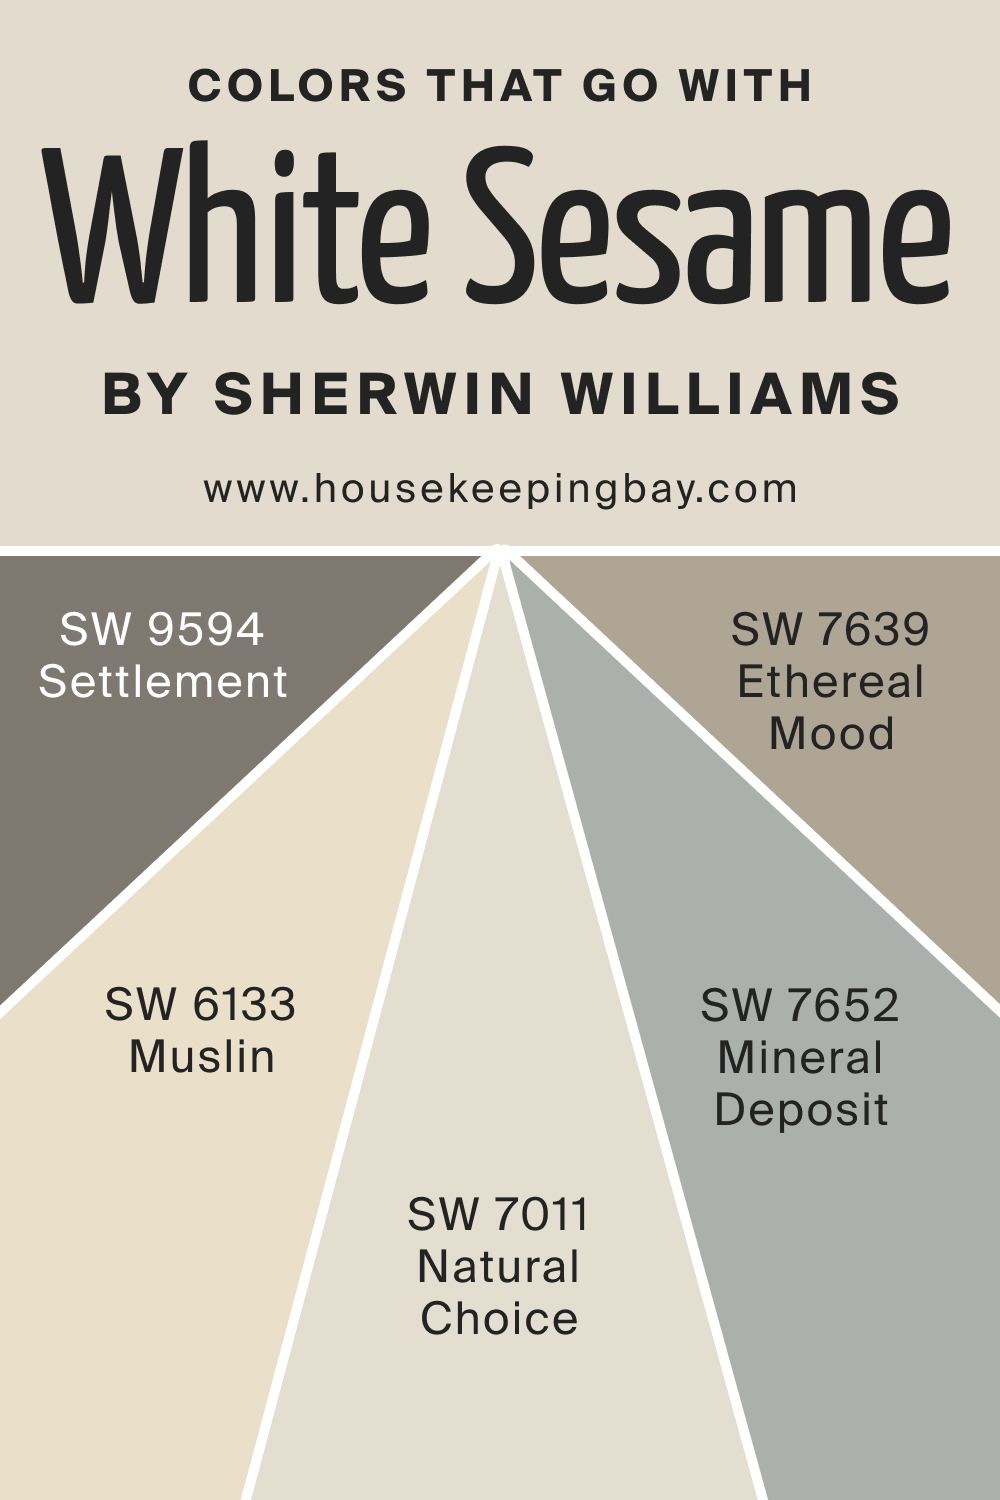 Colors that goes with SW 9586 White Sesame by Sherwin Williams